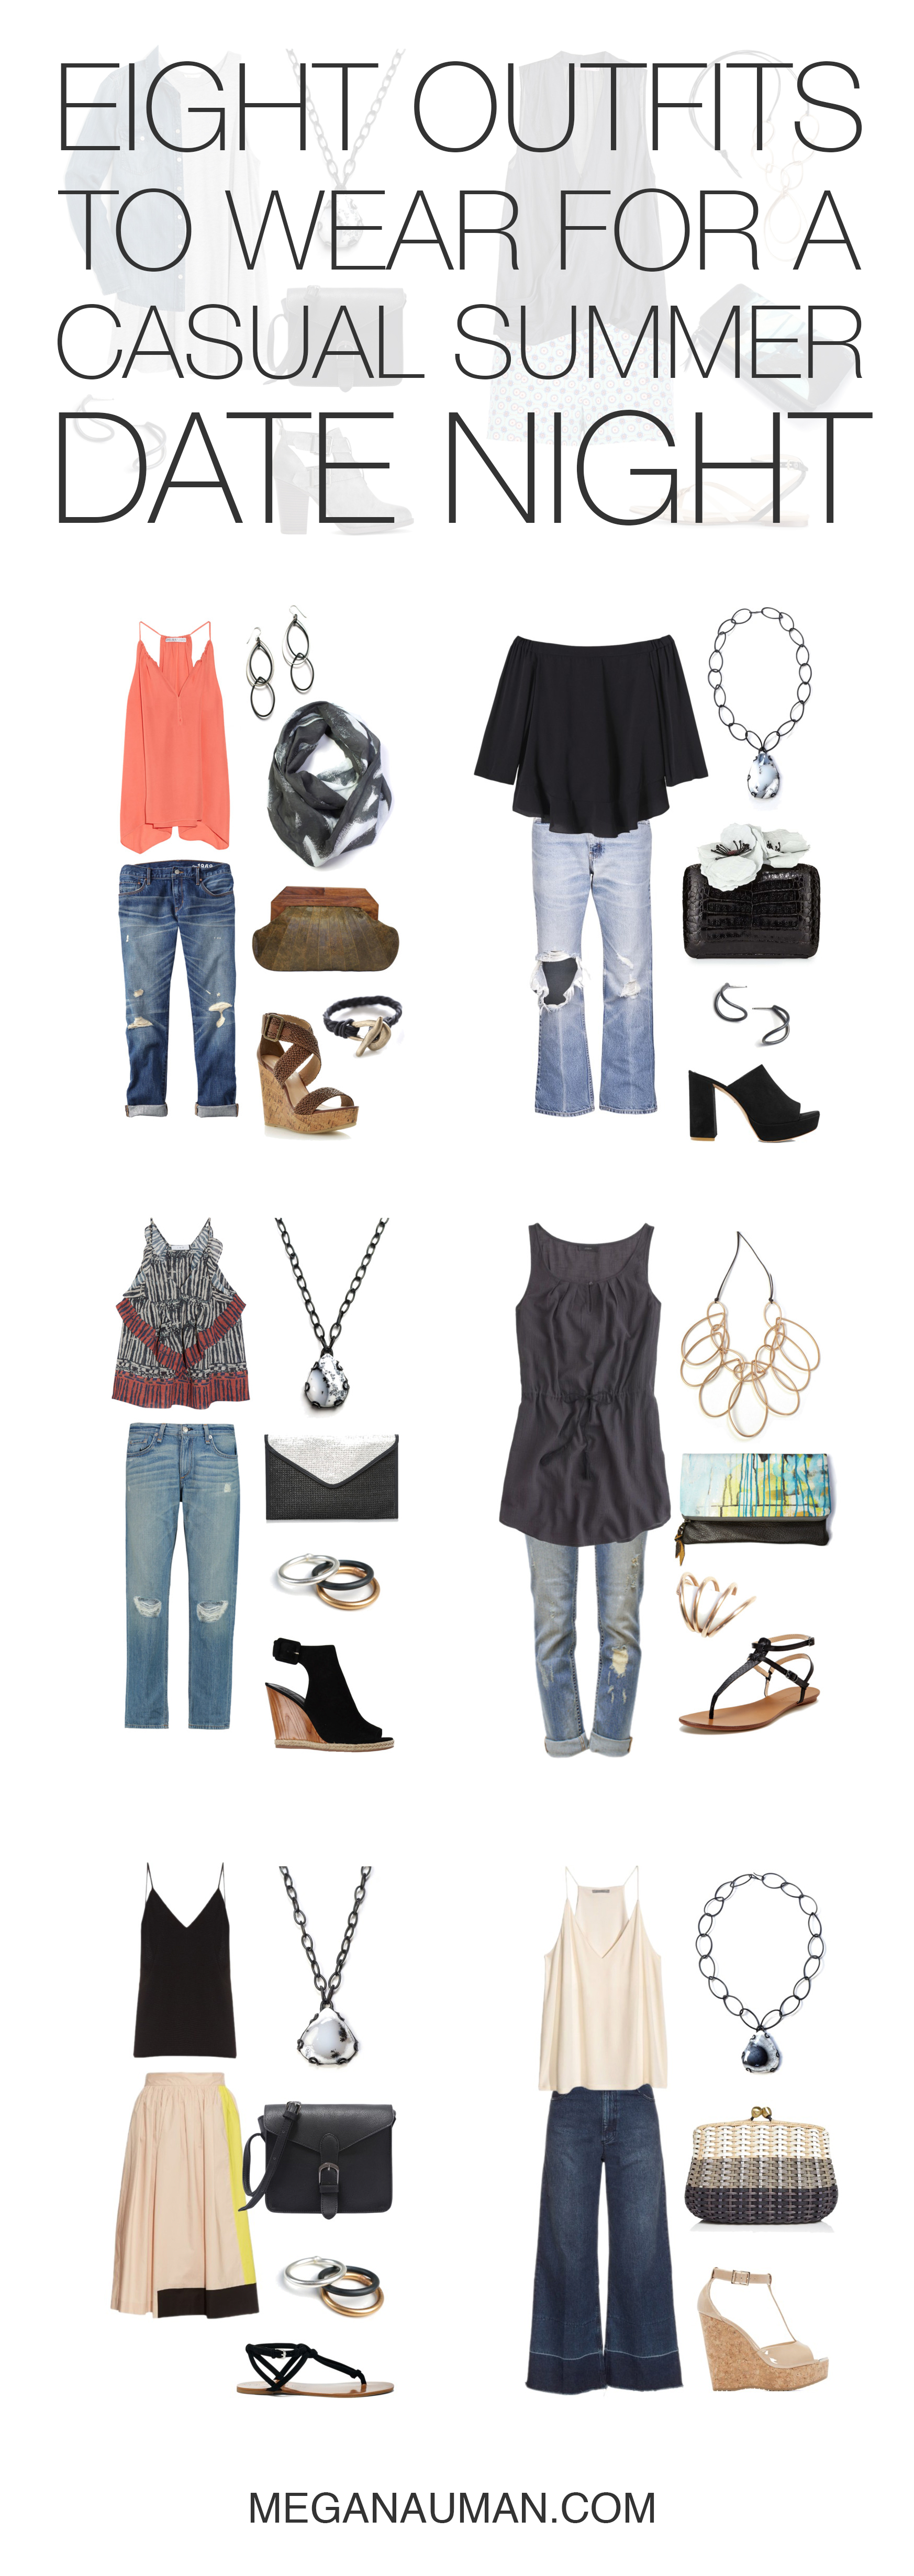 What to Wear: Date Night Outfits  10 Casual + Cute Date Night Outfits